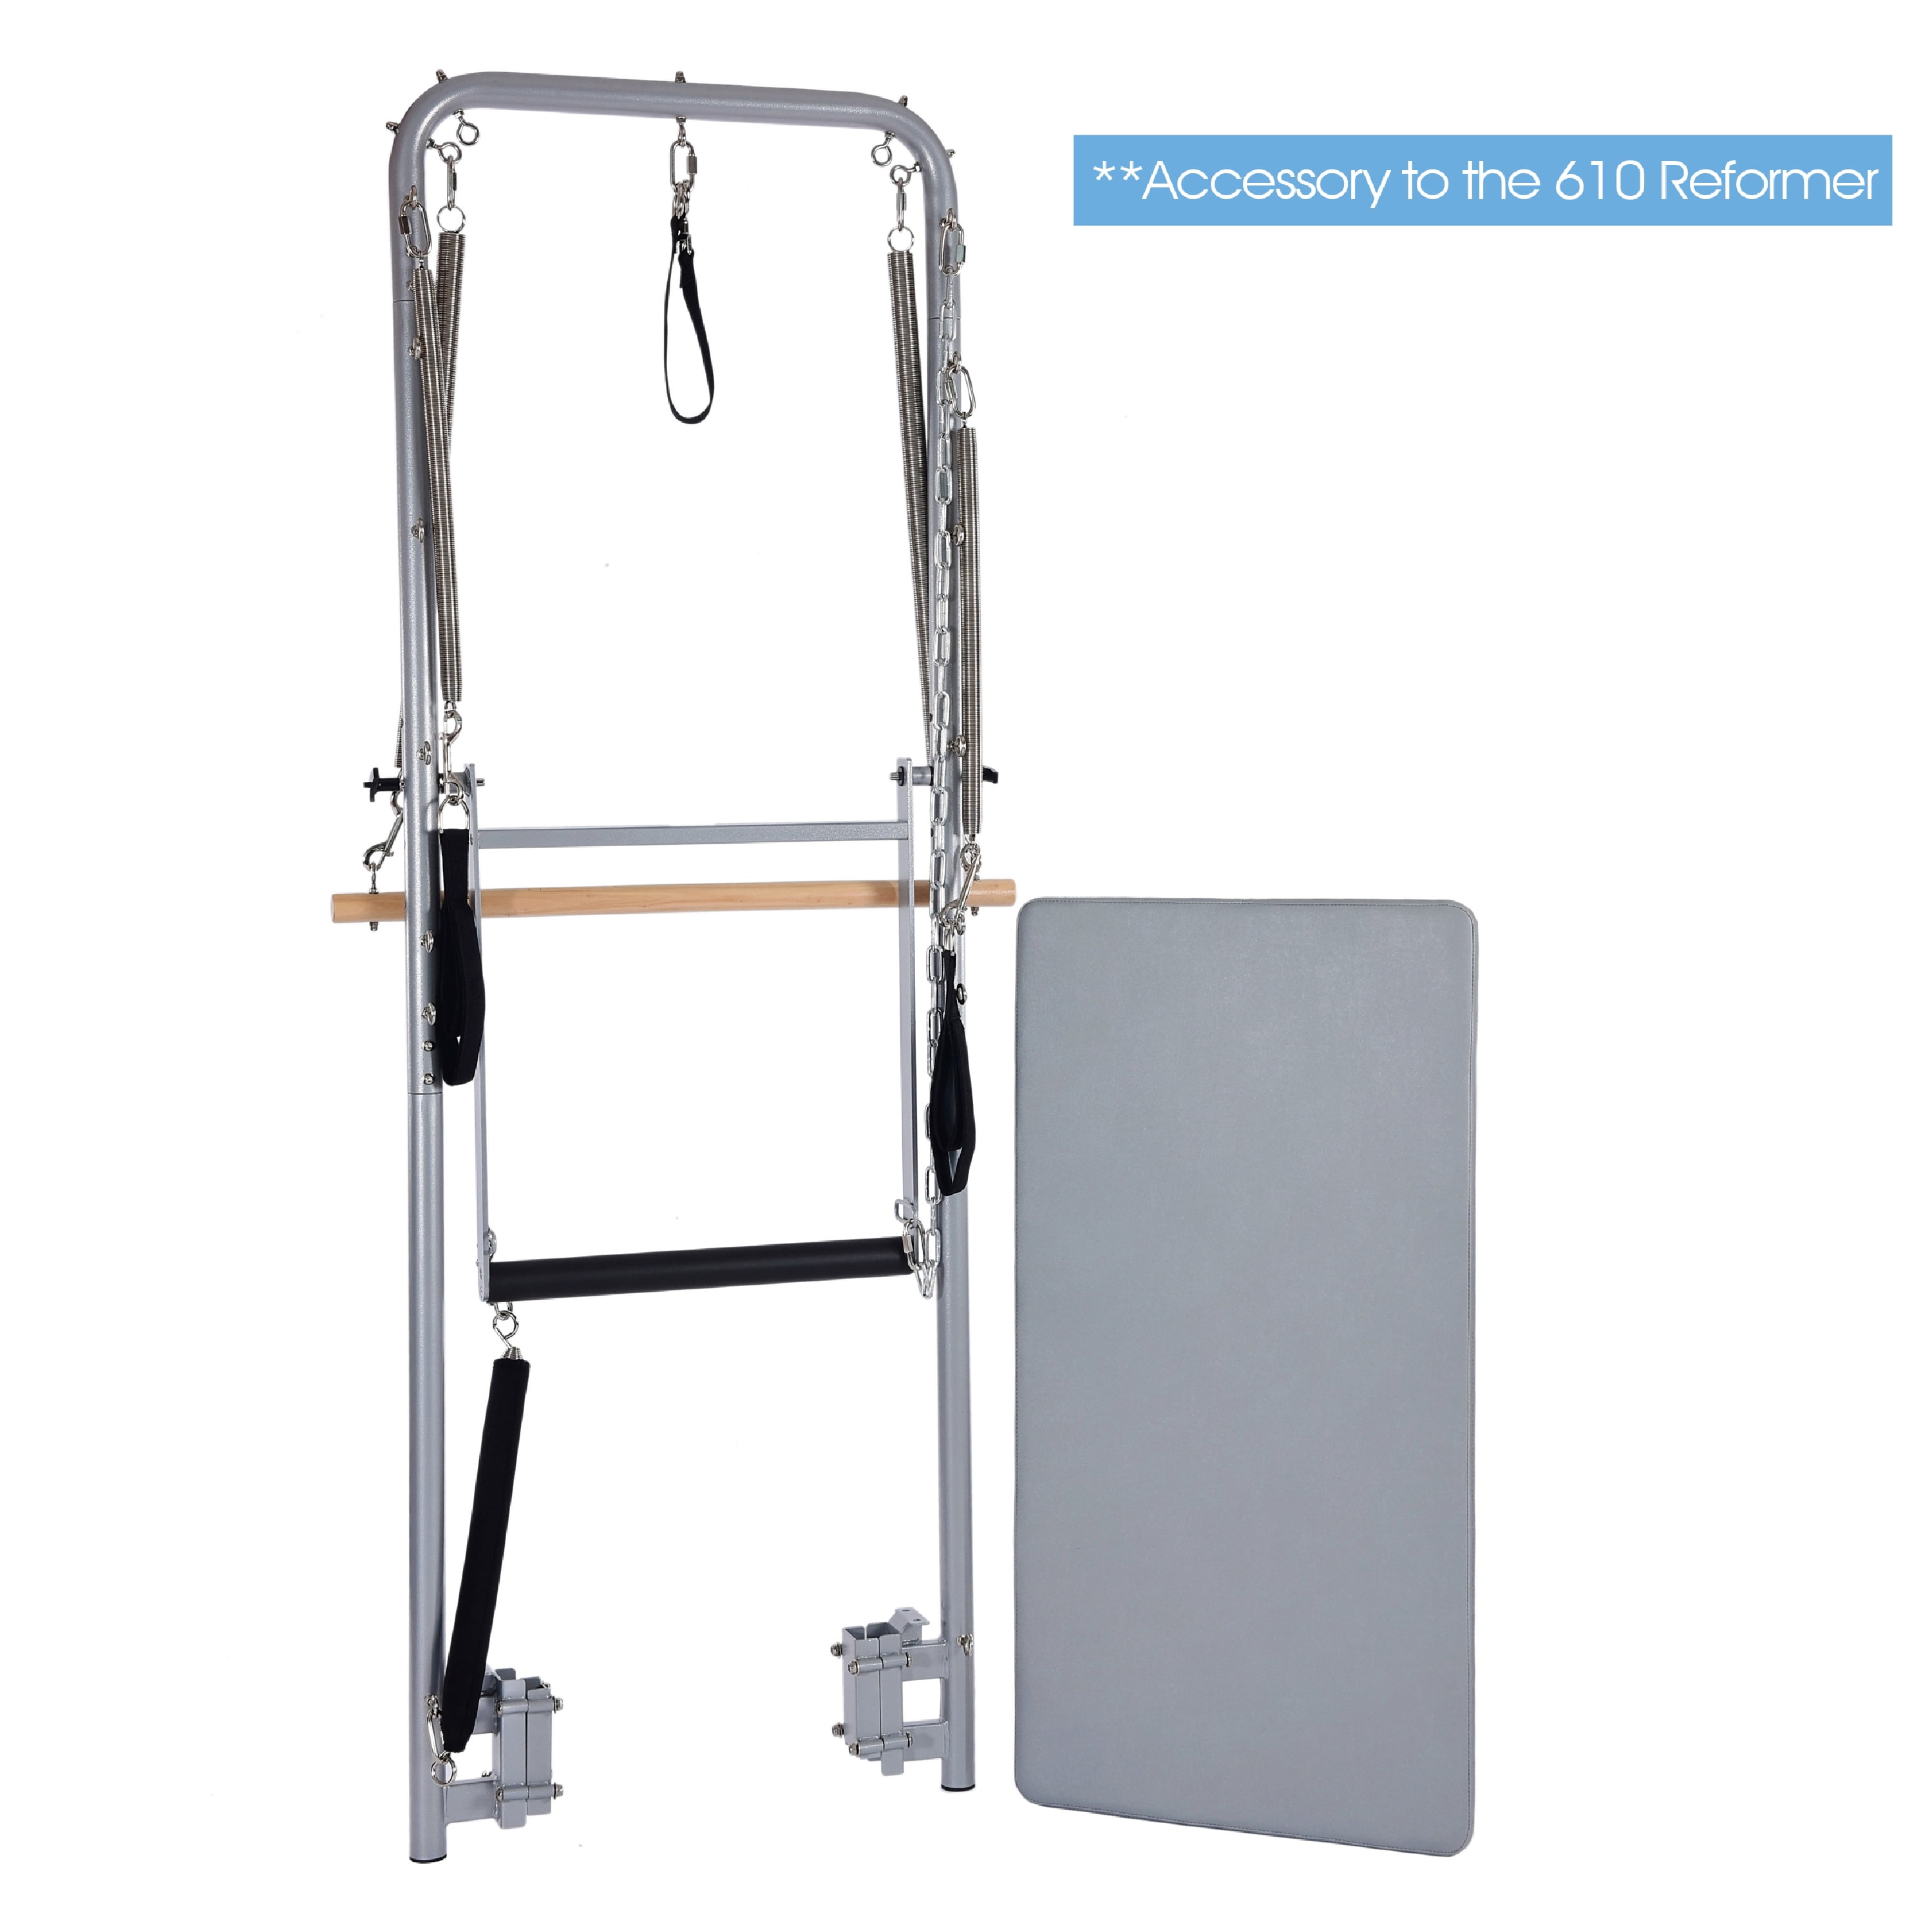 New AeroPilates Precision Cadillac, No Reformer Required with our new  AeroPilates Studio Tower. The AeroPilates Precision Series Cadillac Studio  Tower is a standalone AeroPilates accessory, By AeroPilates